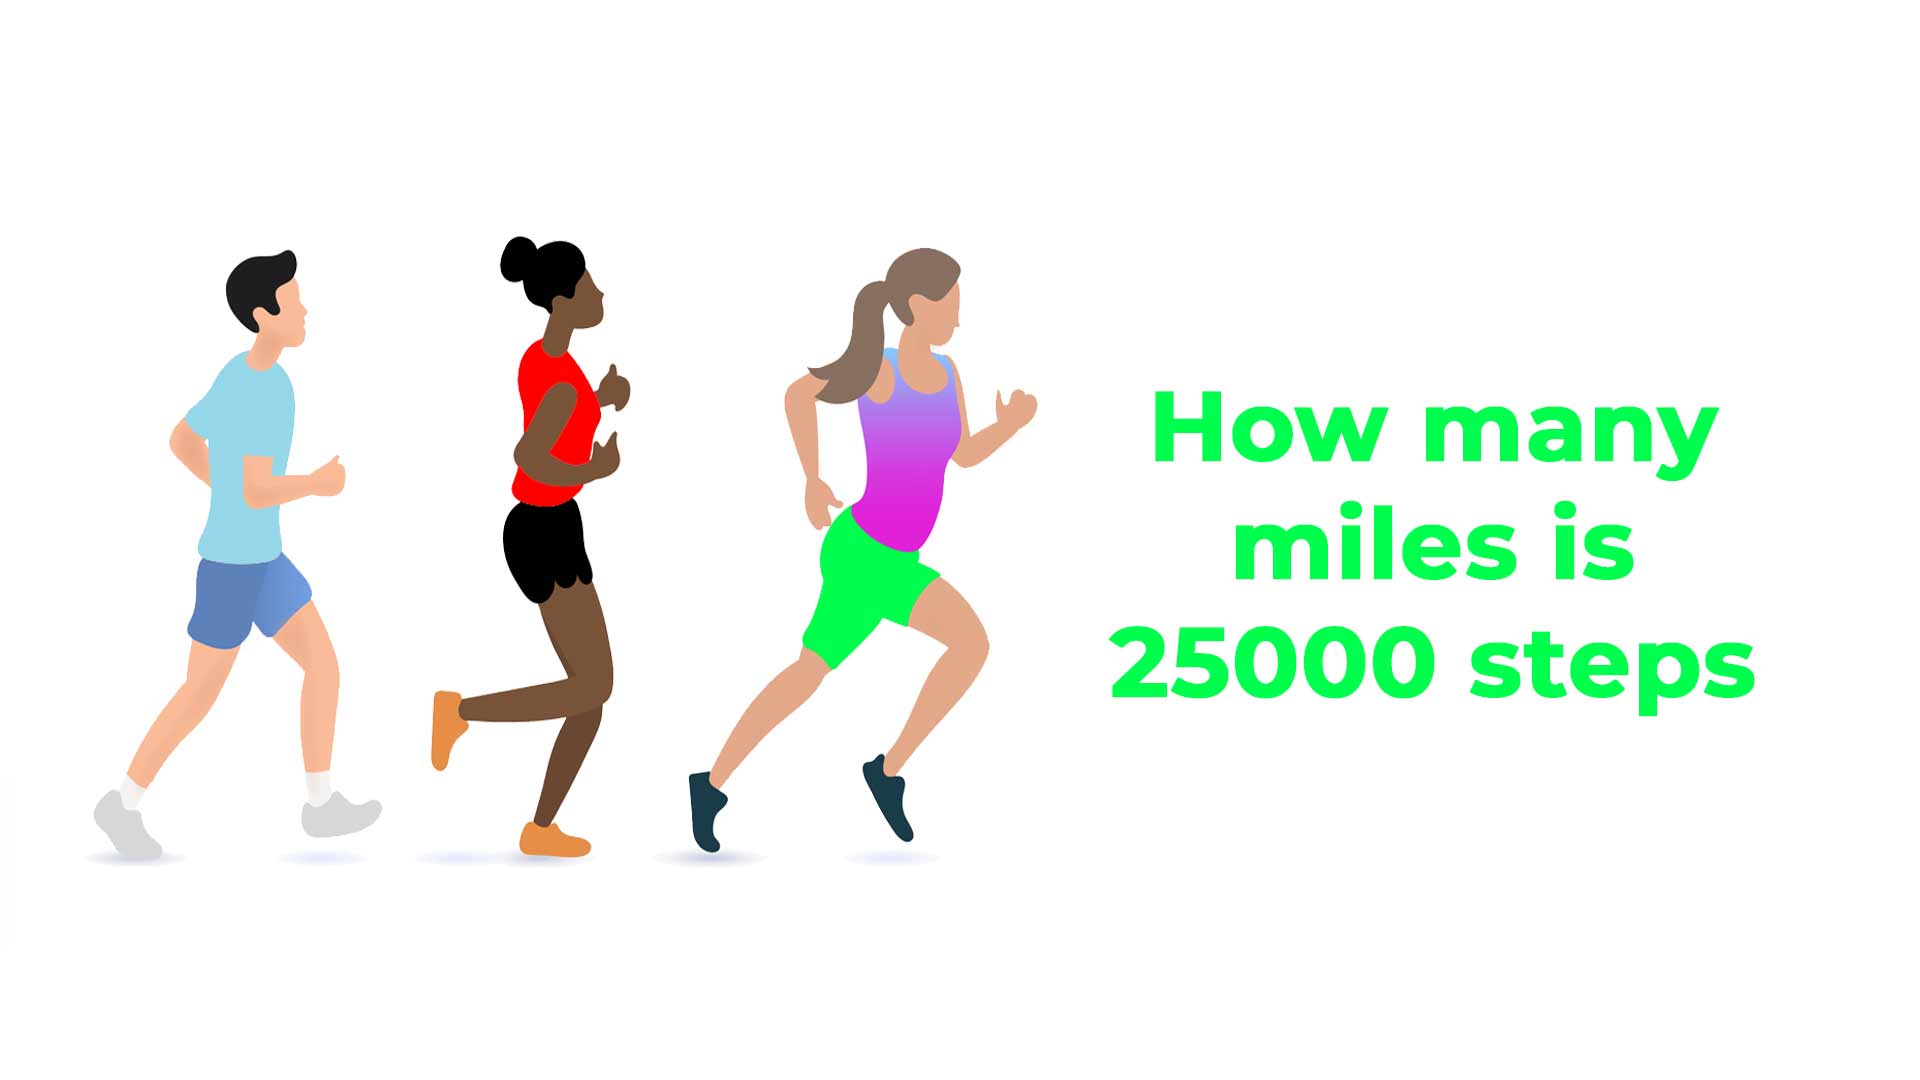 How many miles is 25000 steps